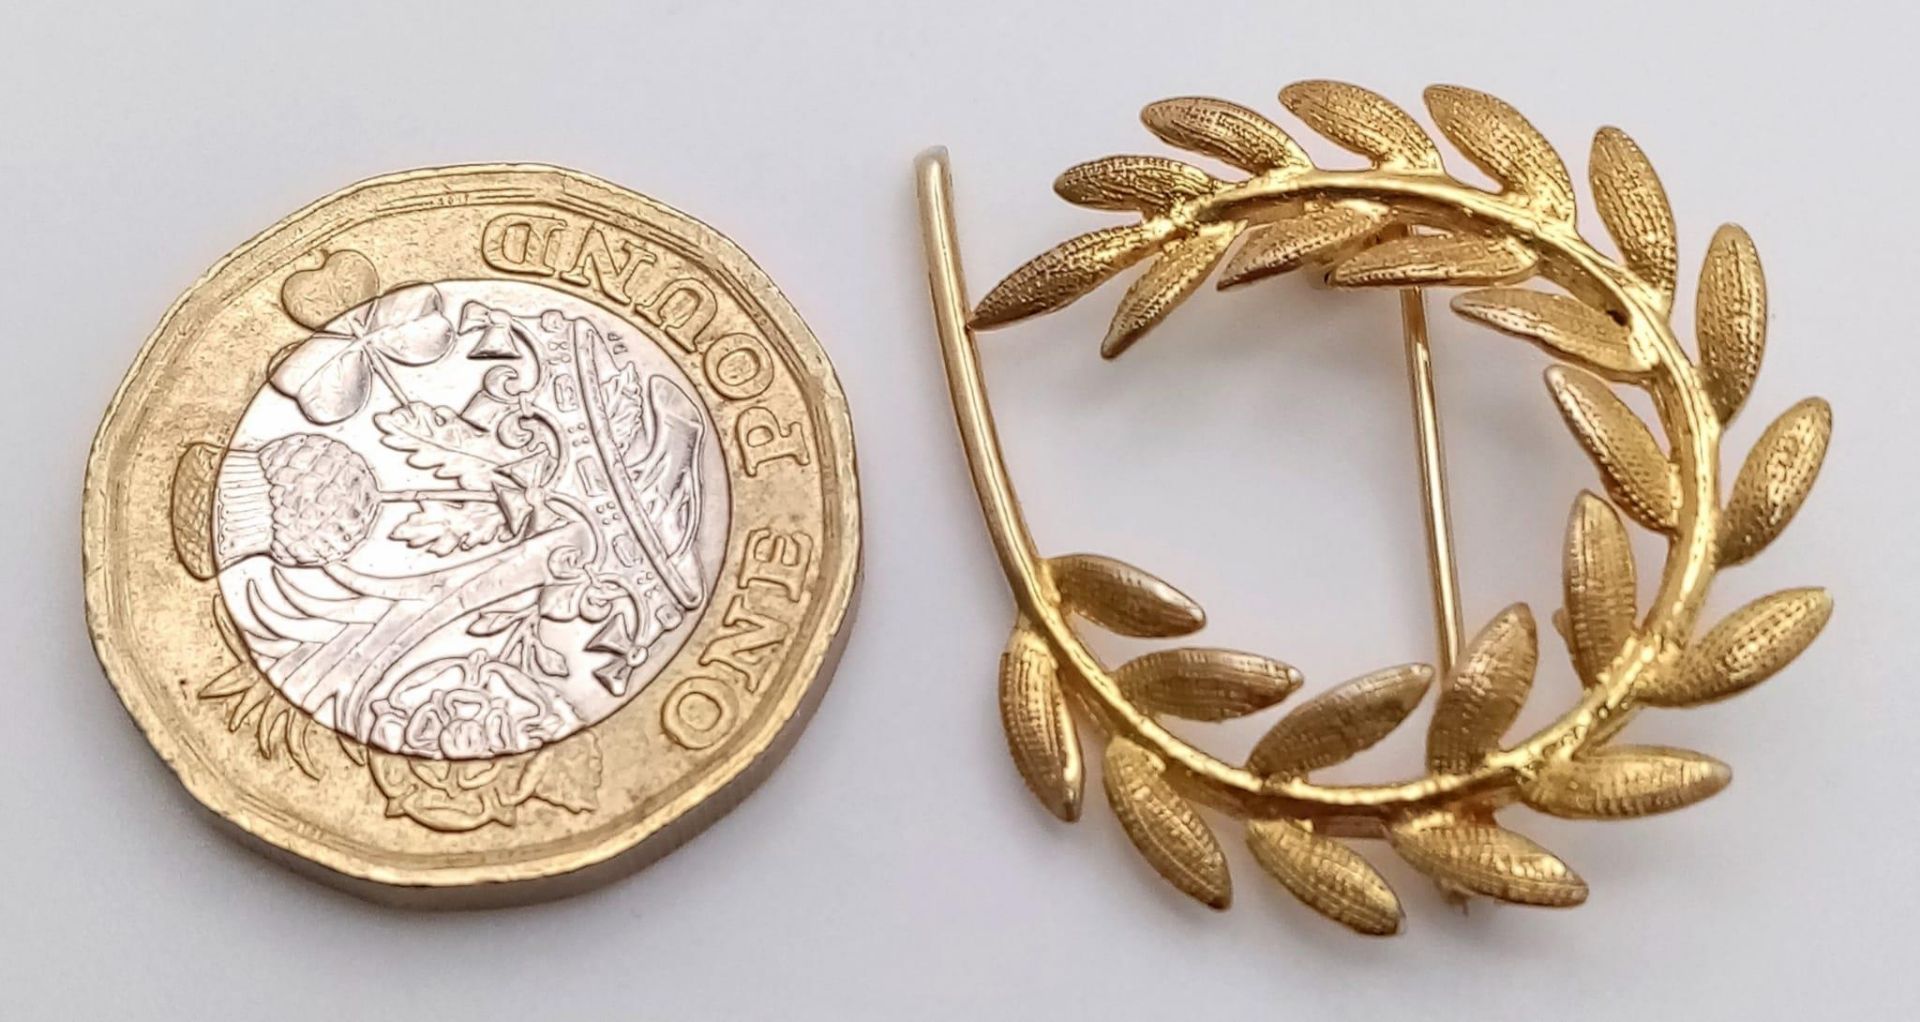 A 9K Yellow Gold Wreath Brooch. 2.5cm x 3cm. 3.46g weight. - Image 3 of 3